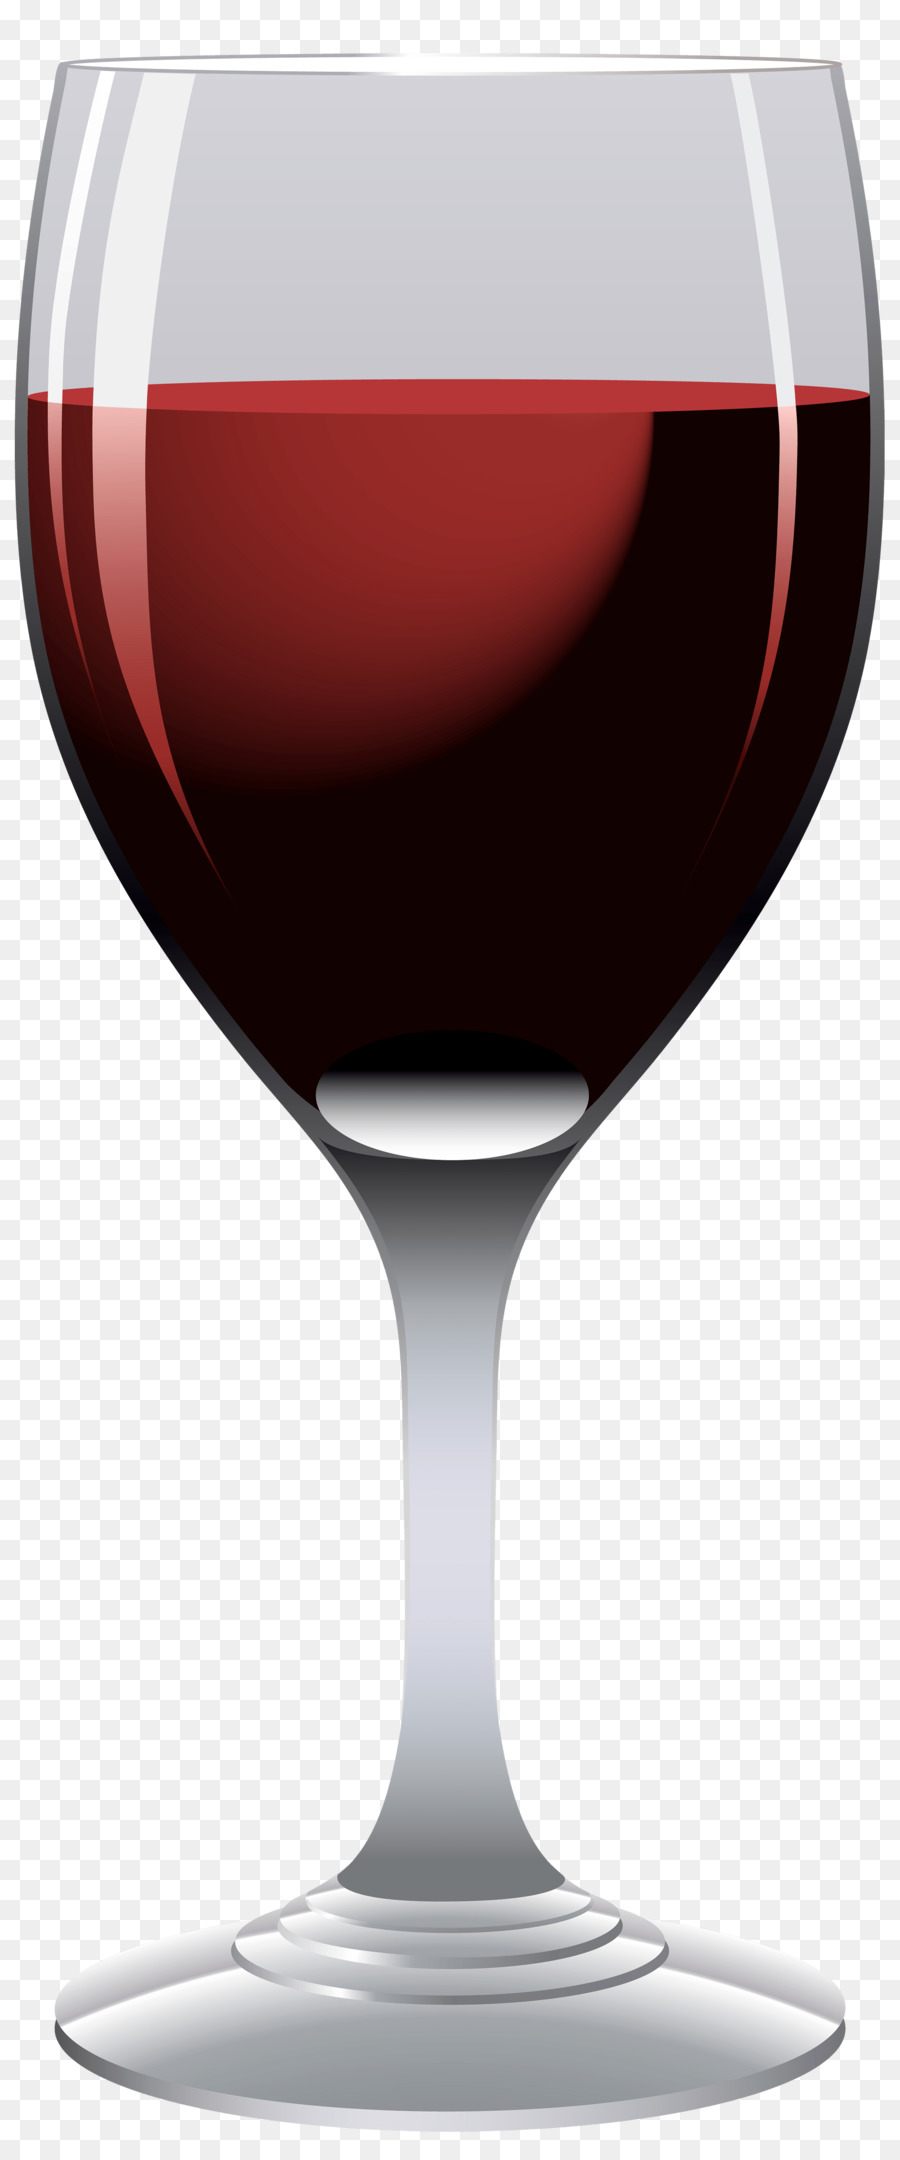 Wine glass Red Wine Clip art - toast png download - 1883*4500 - Free Transparent Wine png Download.